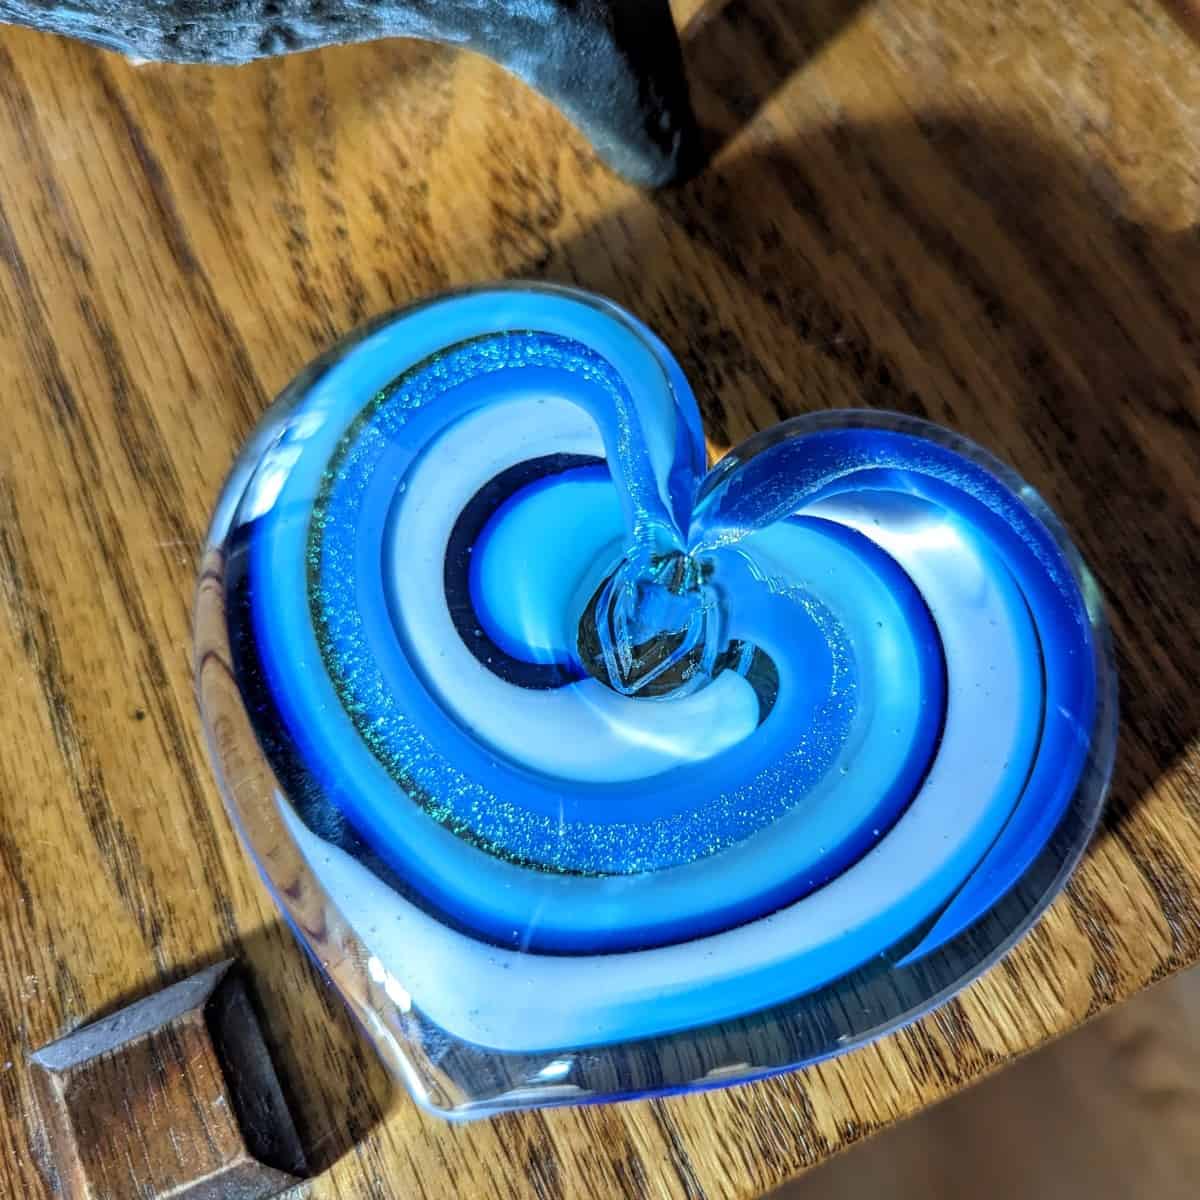 Larkspur Glass Heart Paperweight, Epiphany Studios